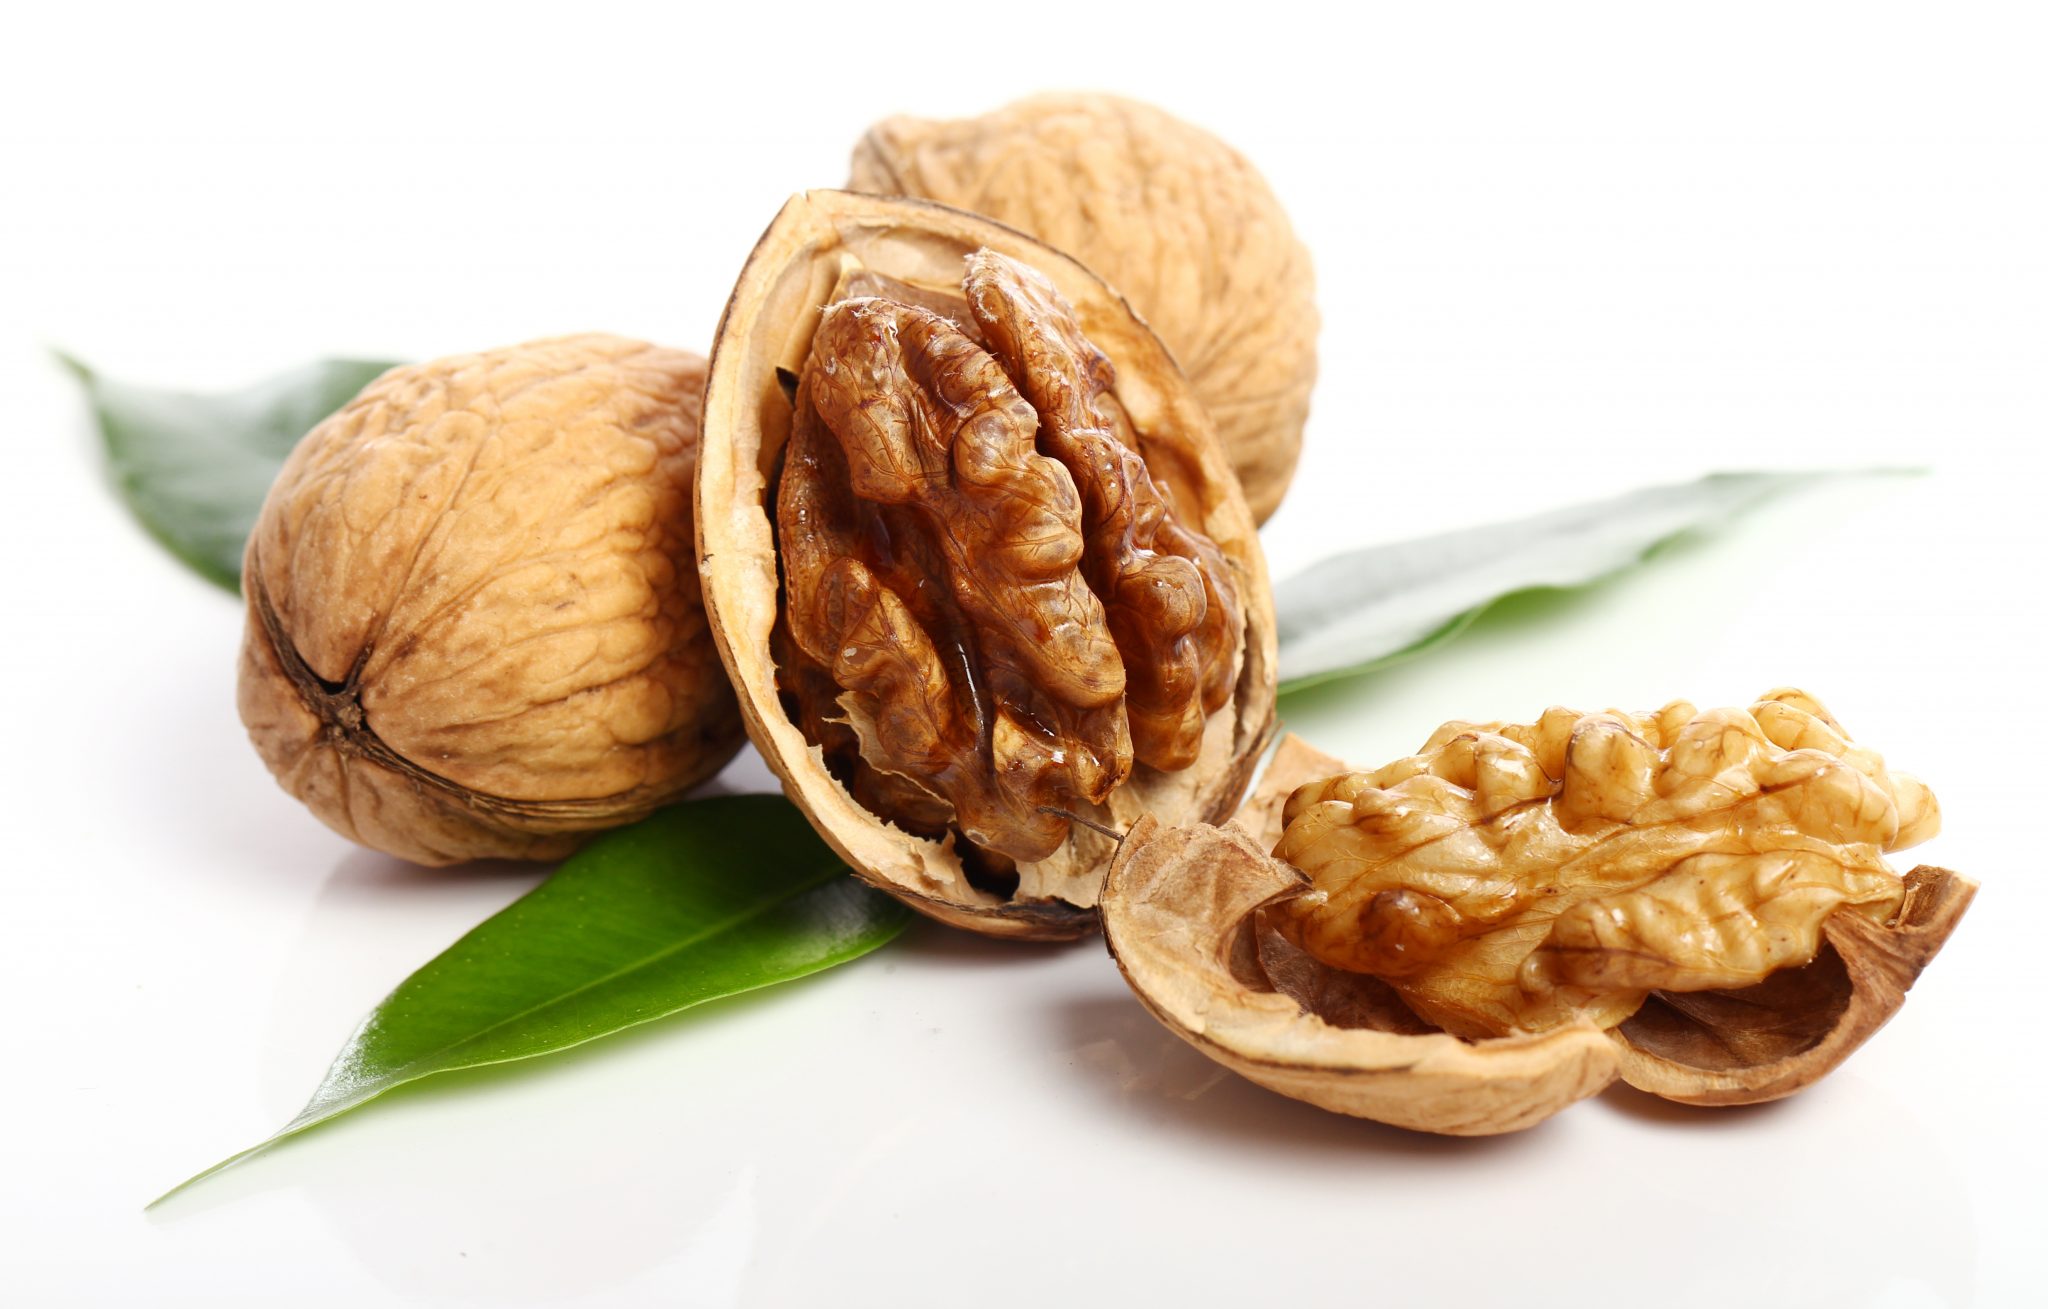 Nutritional benefits of walnuts - Dr. Pingel